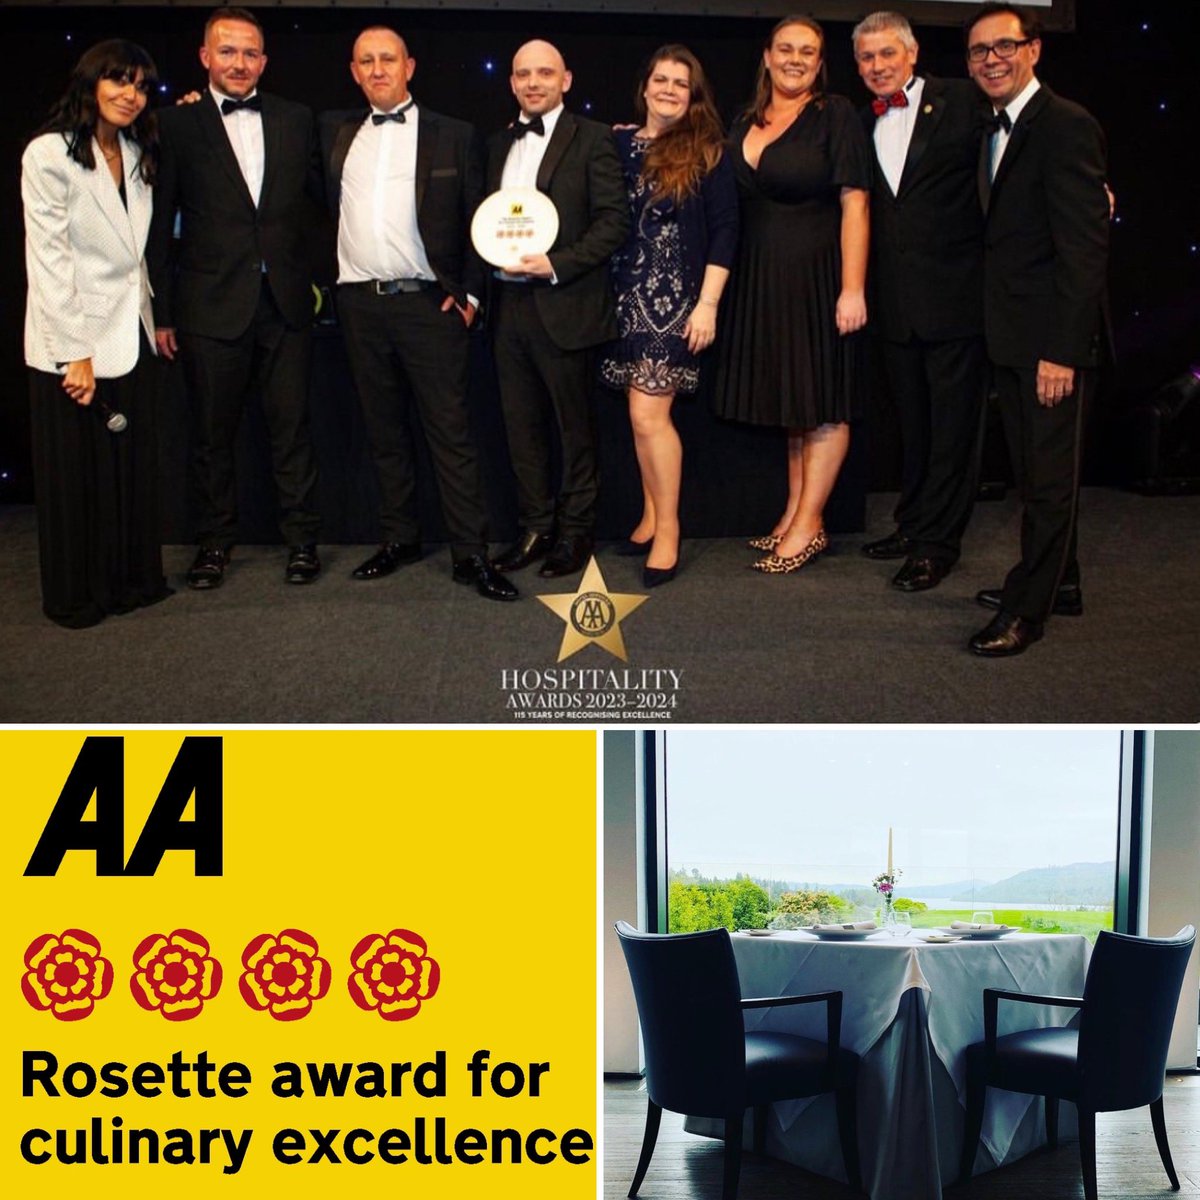 🔥#4
What a team!
What a year!

A fantastic evening for The Samling team @AAHospitality Awards - 4 Rosettes!

Well done to all the winners of the evening, especially the Cumbrian venues, very well deserved awards heading to the county
#aarosettes #aaawards #aahospitality #cumbria